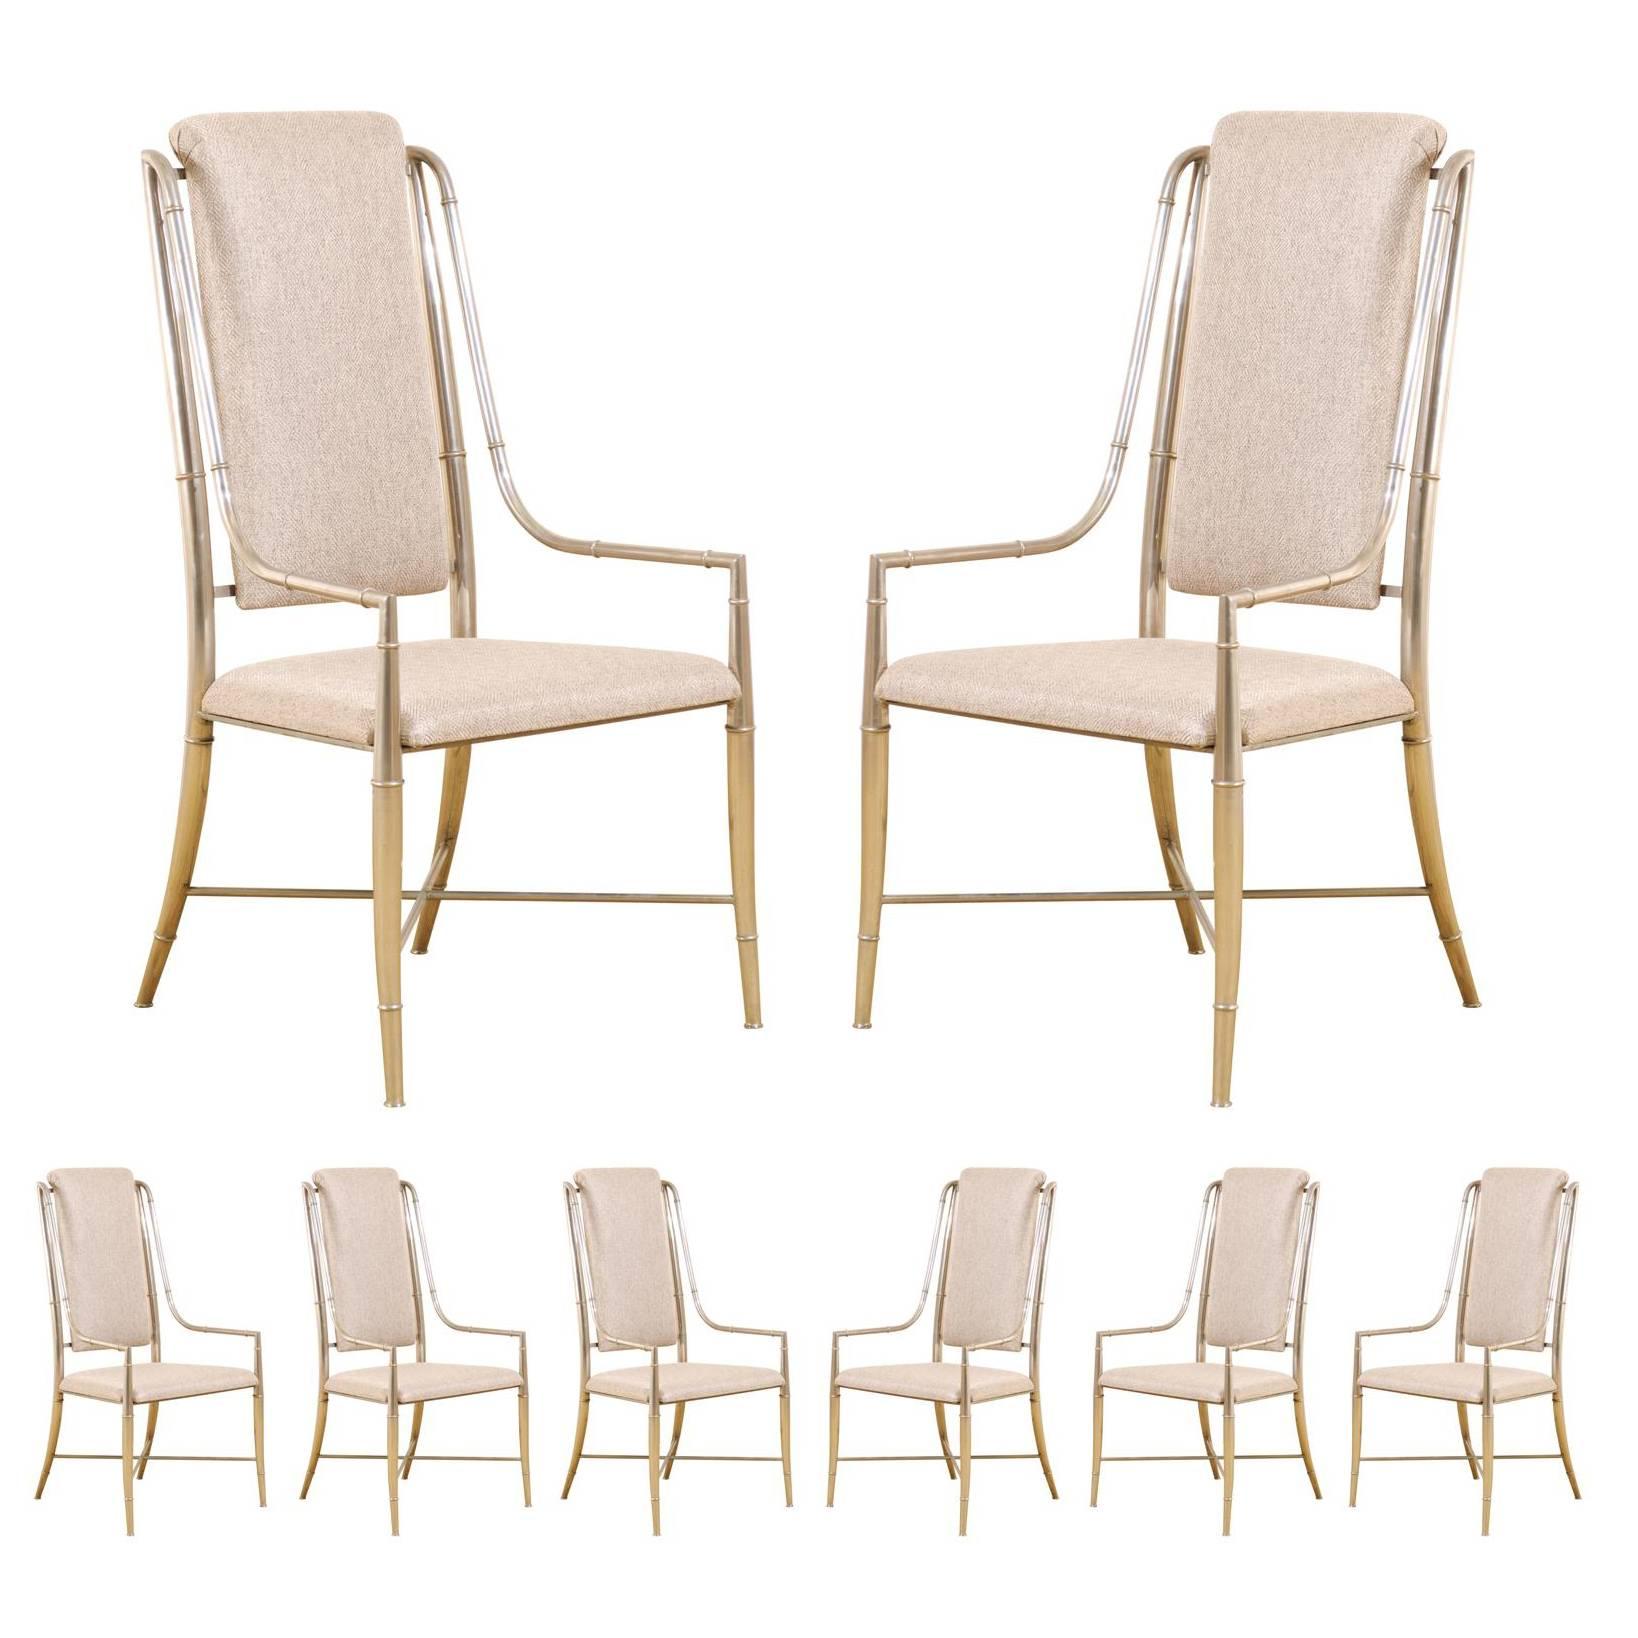 Unique Set of Eight Pewter Dining Chairs by Mastercraft